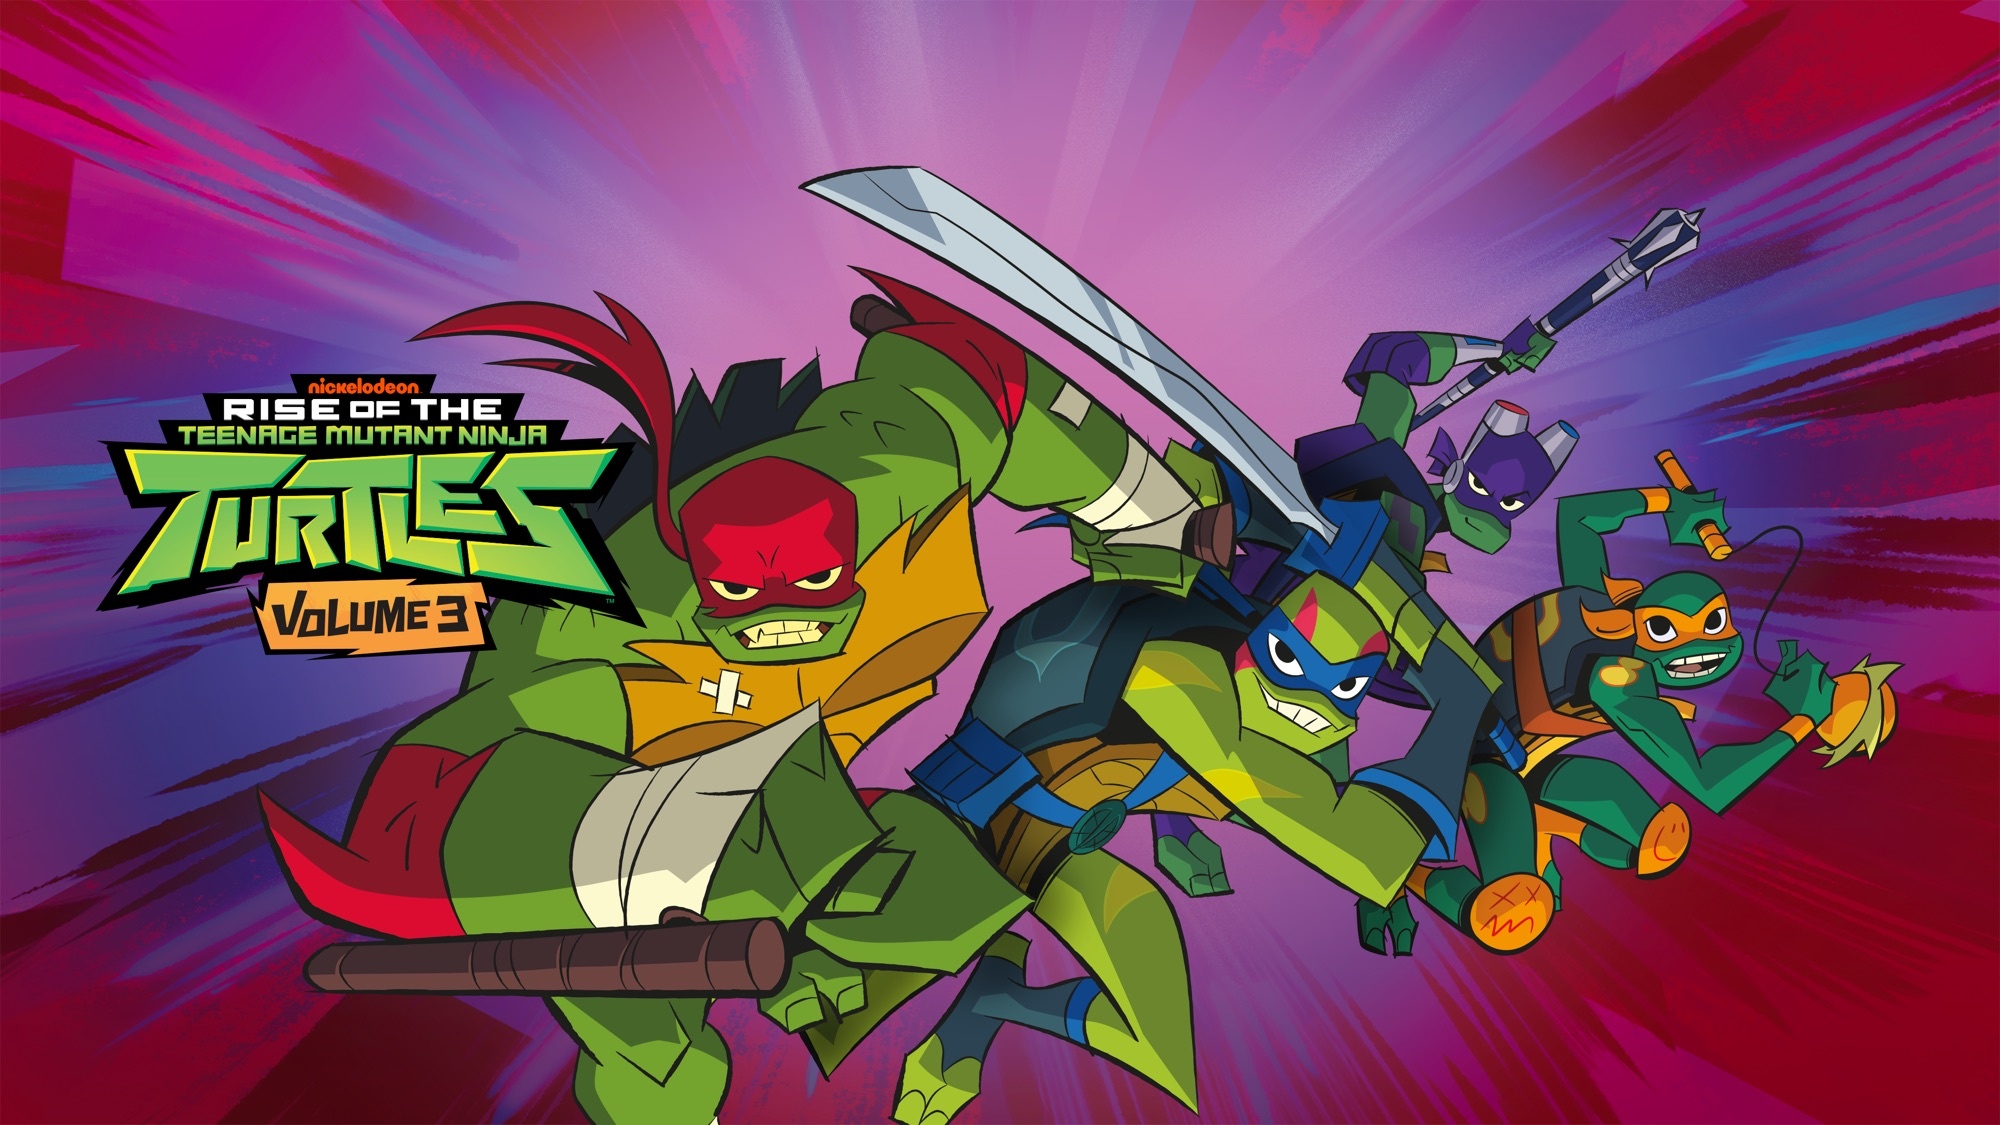 Rise of the Teenage Mutant Ninja Turtles wallpaper, HD background image, Action-packed animation, Exciting storyline, 2000x1130 HD Desktop